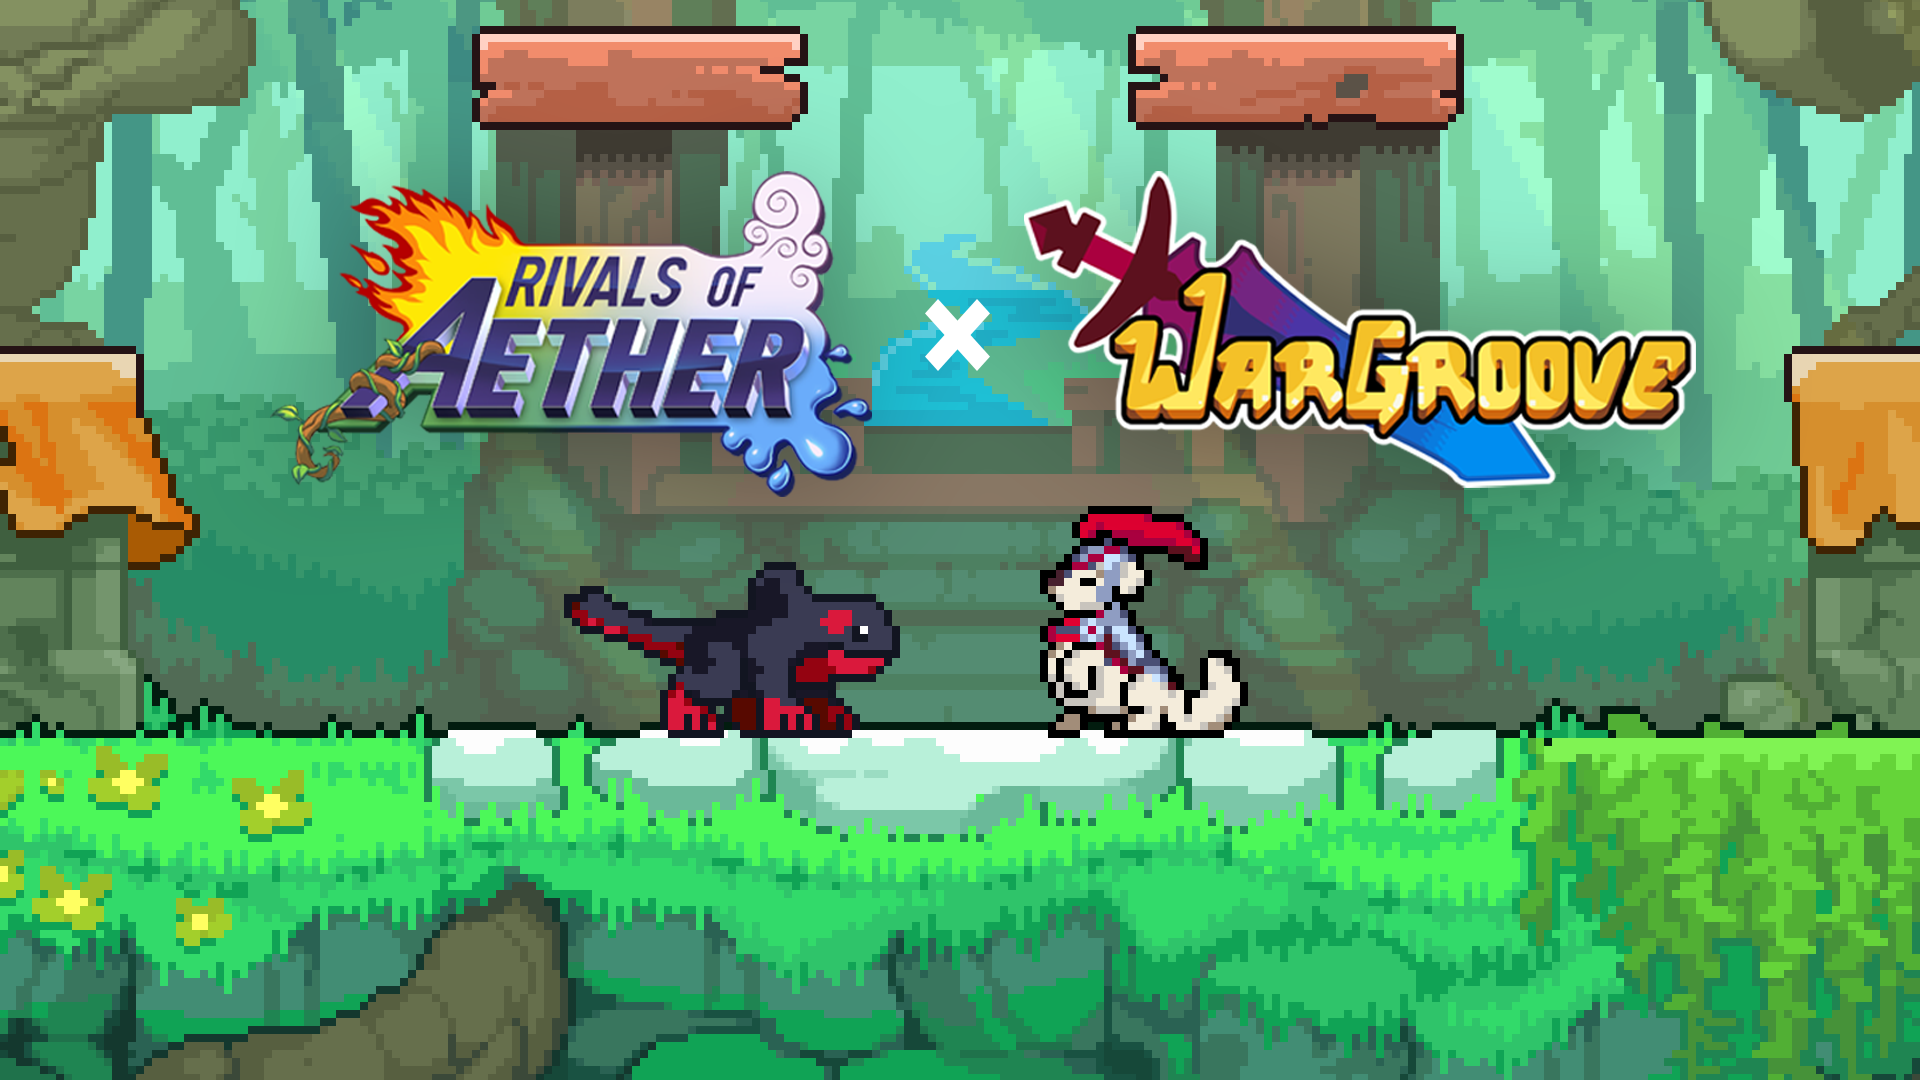 rivals of aether release date switch